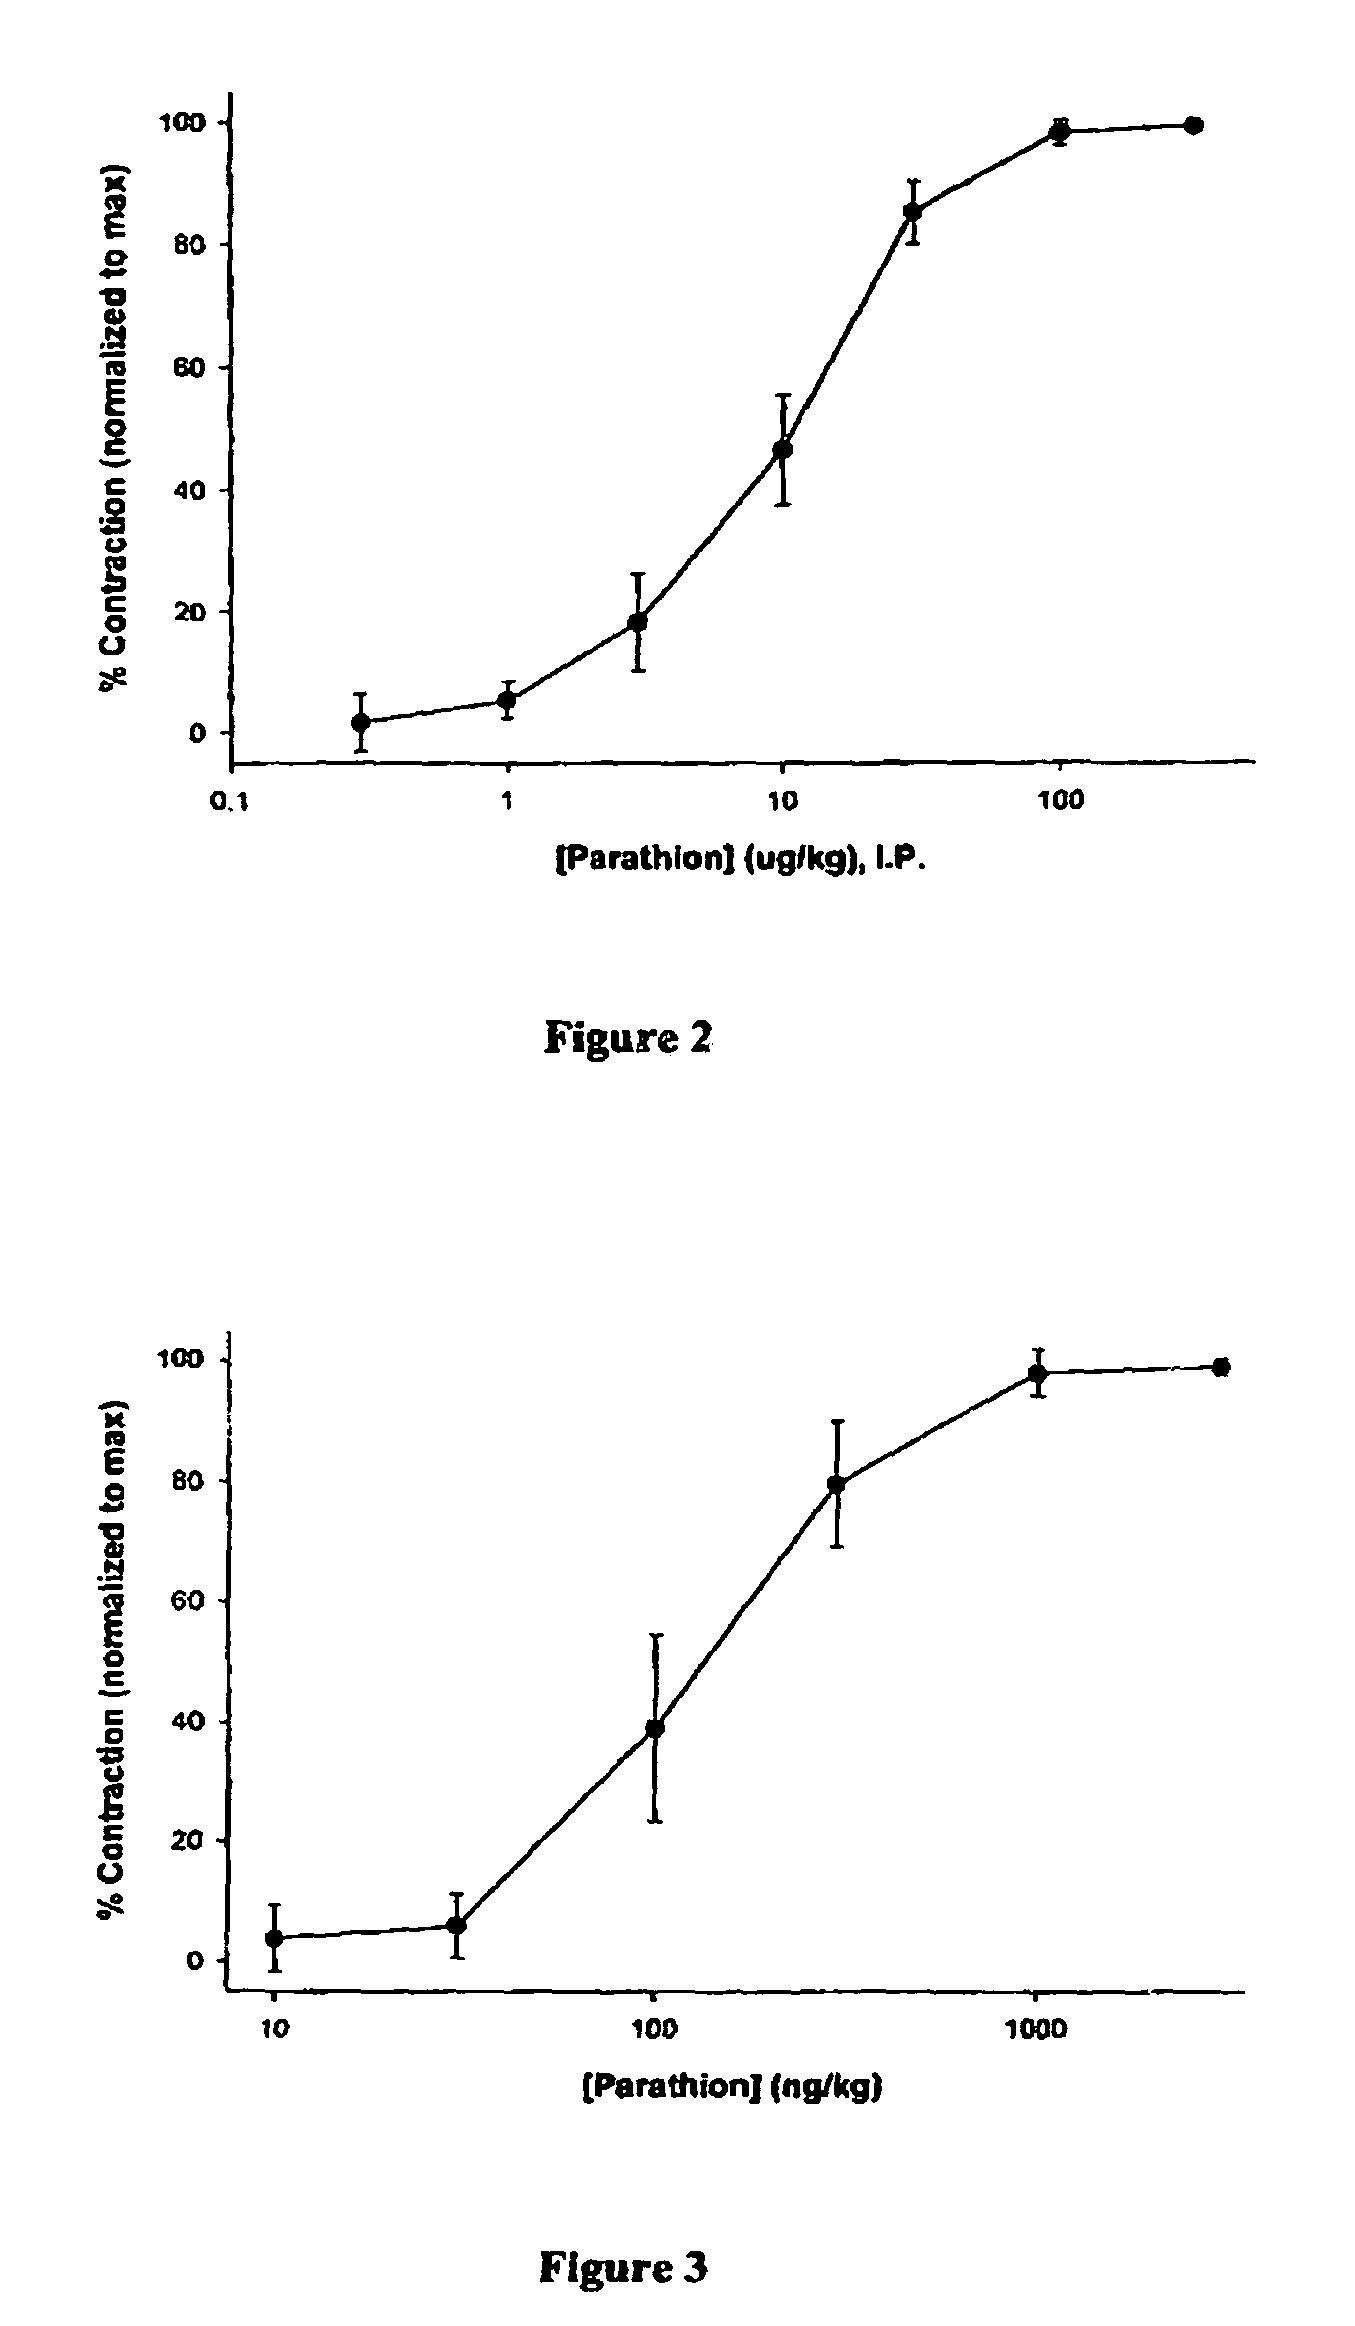 Method for diagnosing a disease state using ocular characteristics